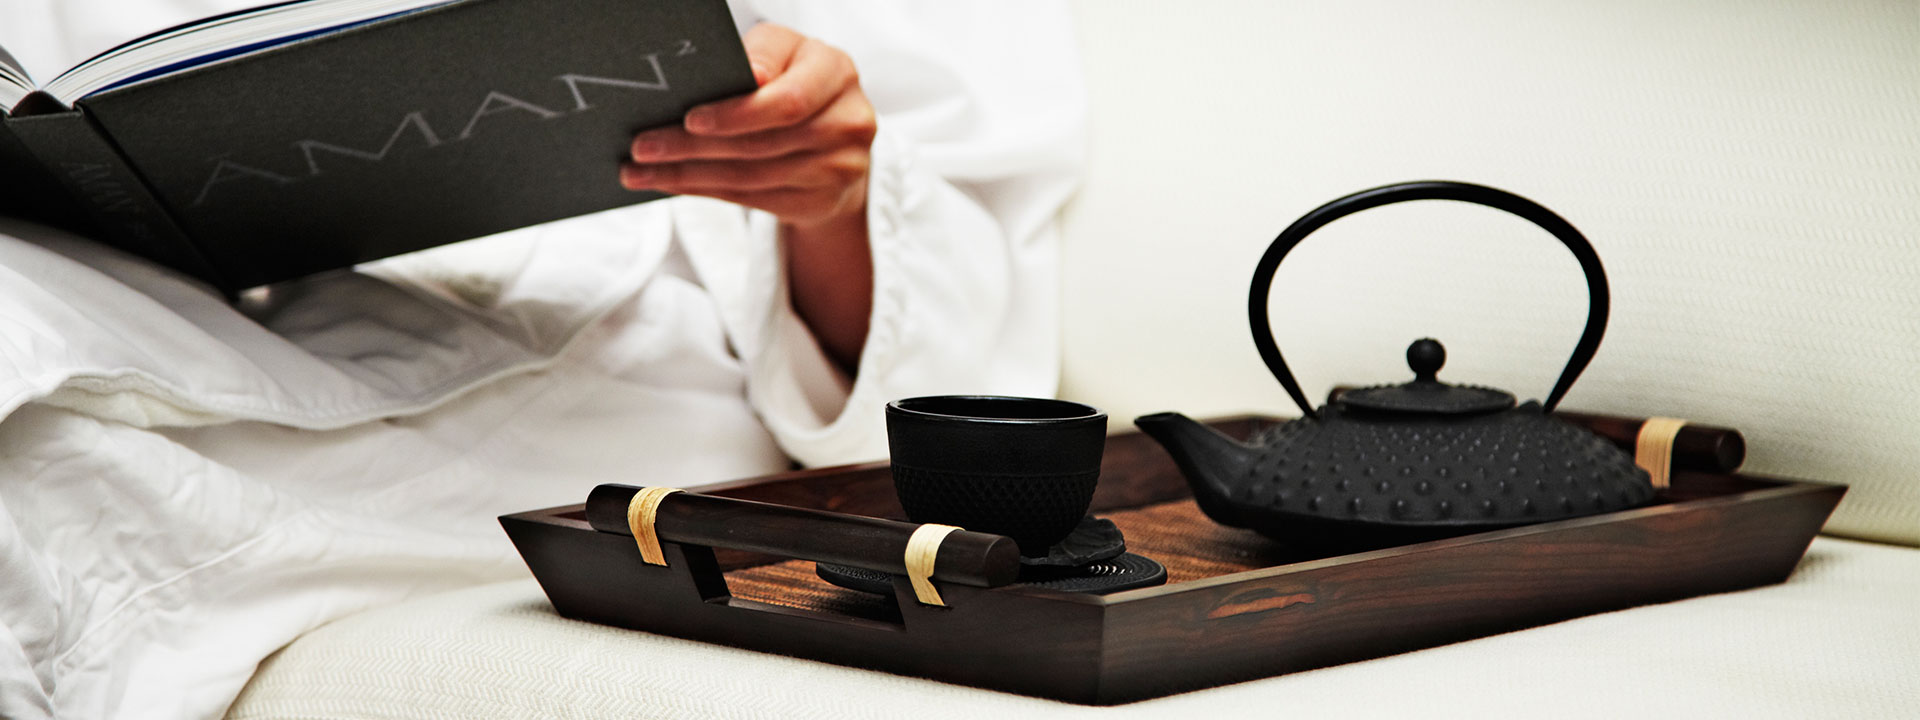 View the relaxed atmosphere with tea and reading a book at Aman Spa by The Connaught.